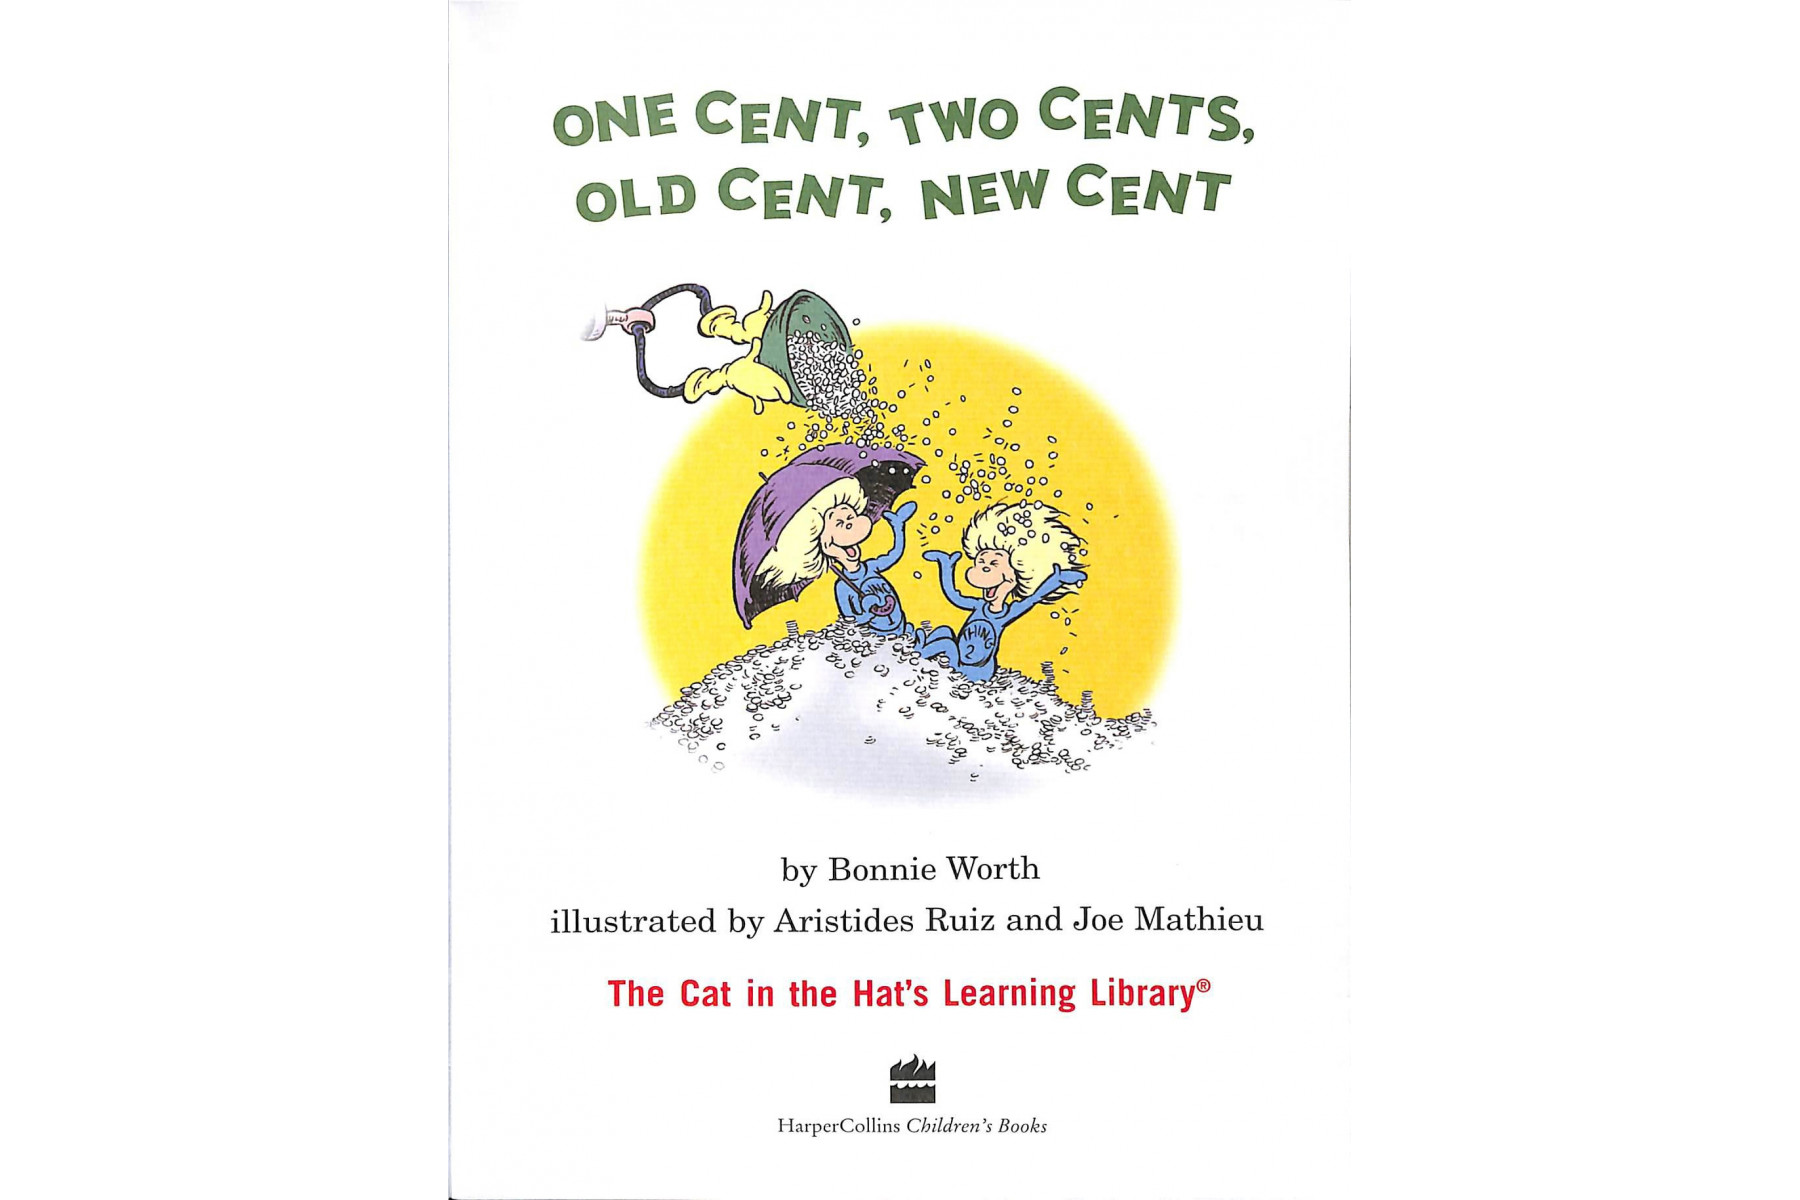 One Cent, Two Cents: All About Money (The Cat in the Hat's Learning Library)